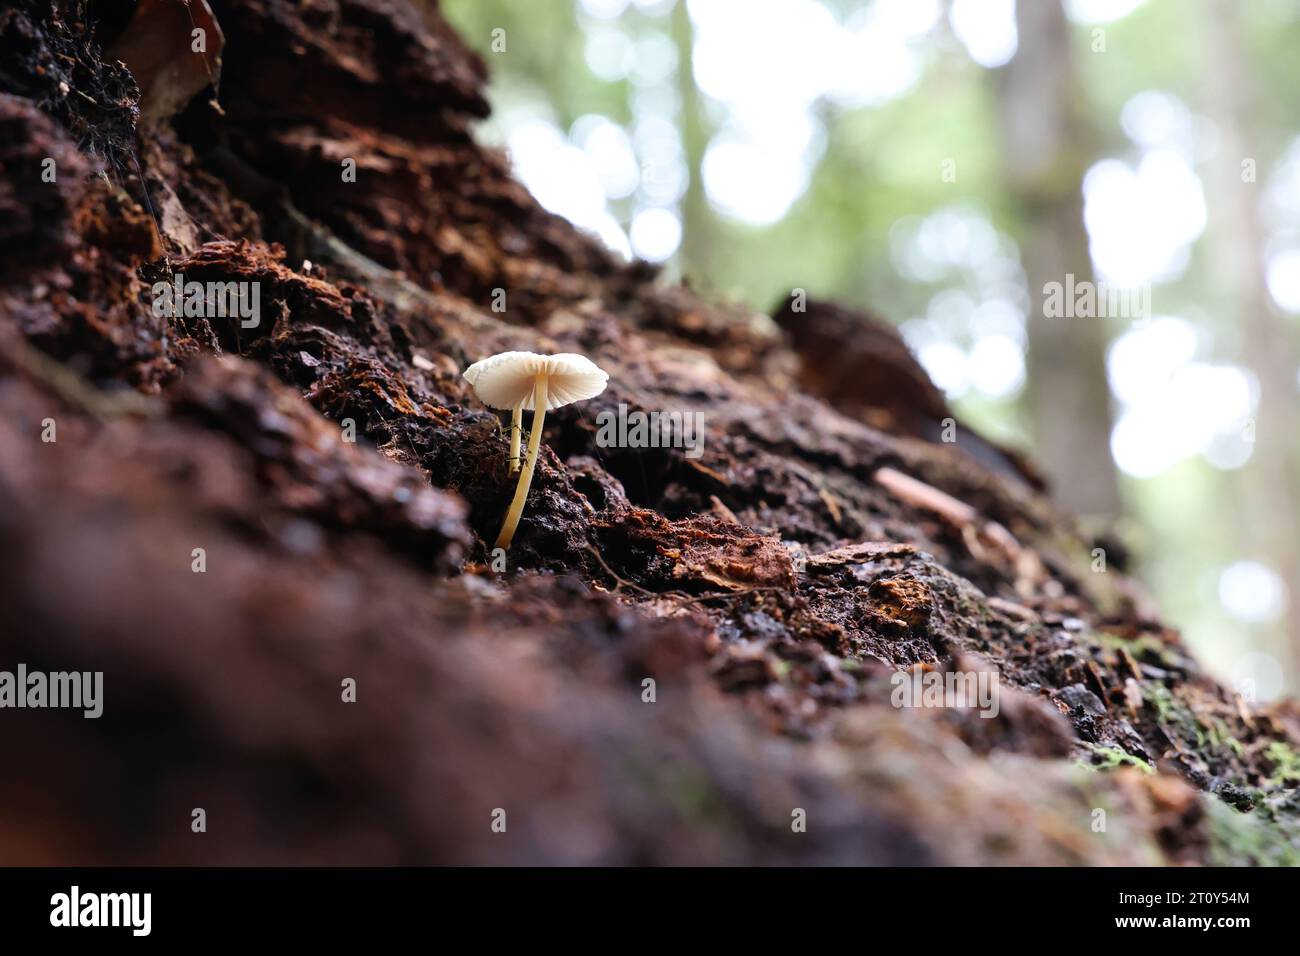 Looking up at a beautiful small lightly coloured fungi or mushroom sprouting up from a decaying fallen log in the Tasmanian wilderness and forest. Stock Photo